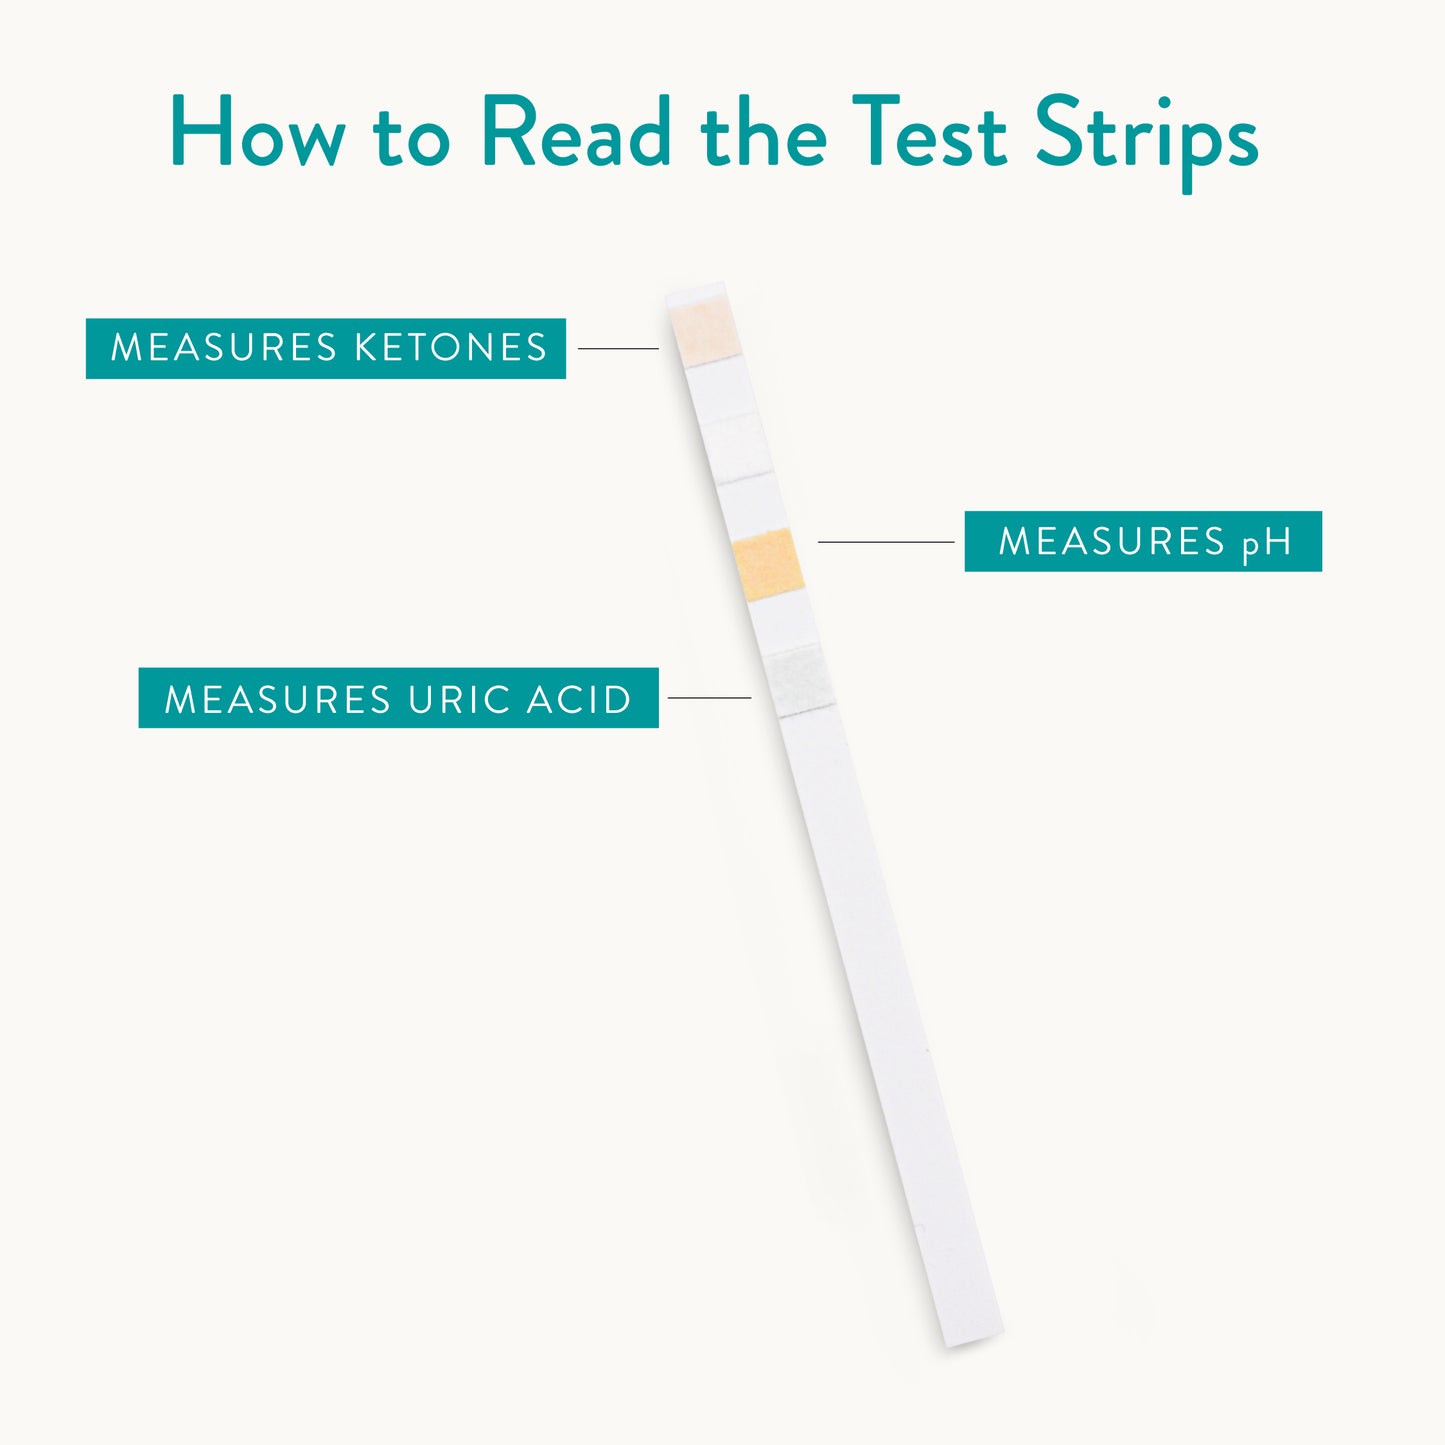 How to read the test strips. Top segment measures ketones, 3rd segment measures pH, bottom segment measures uric acid